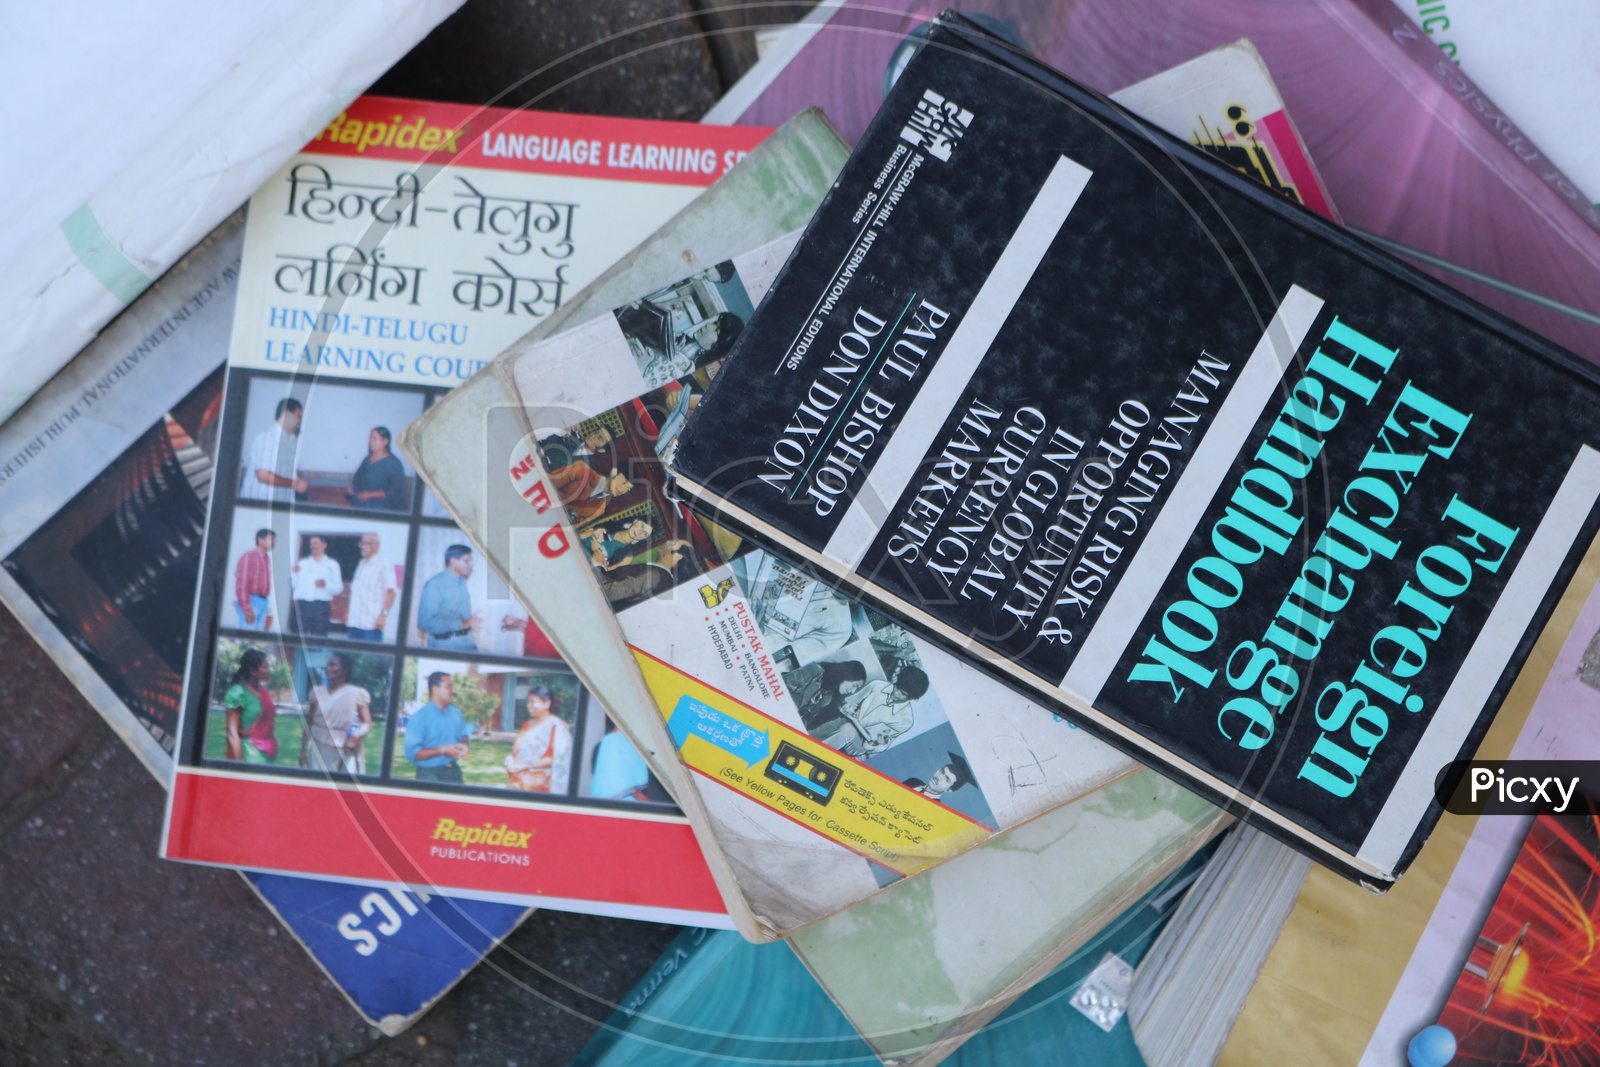 books from streetsq